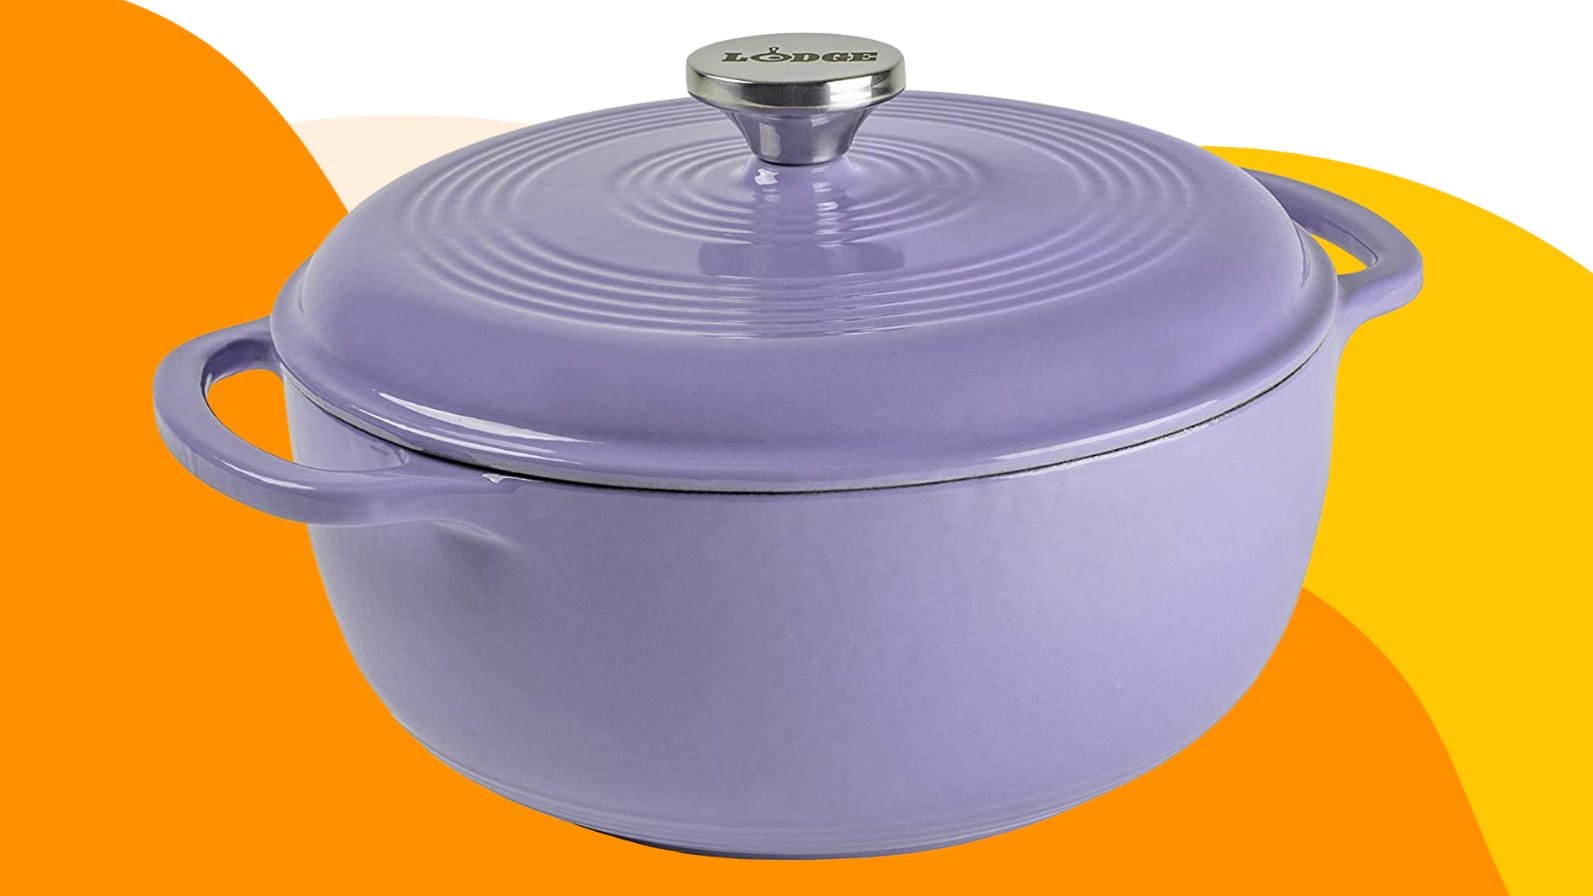 This Lodge Dutch oven is one of our favorite Amazon Prime Day 2021 deals